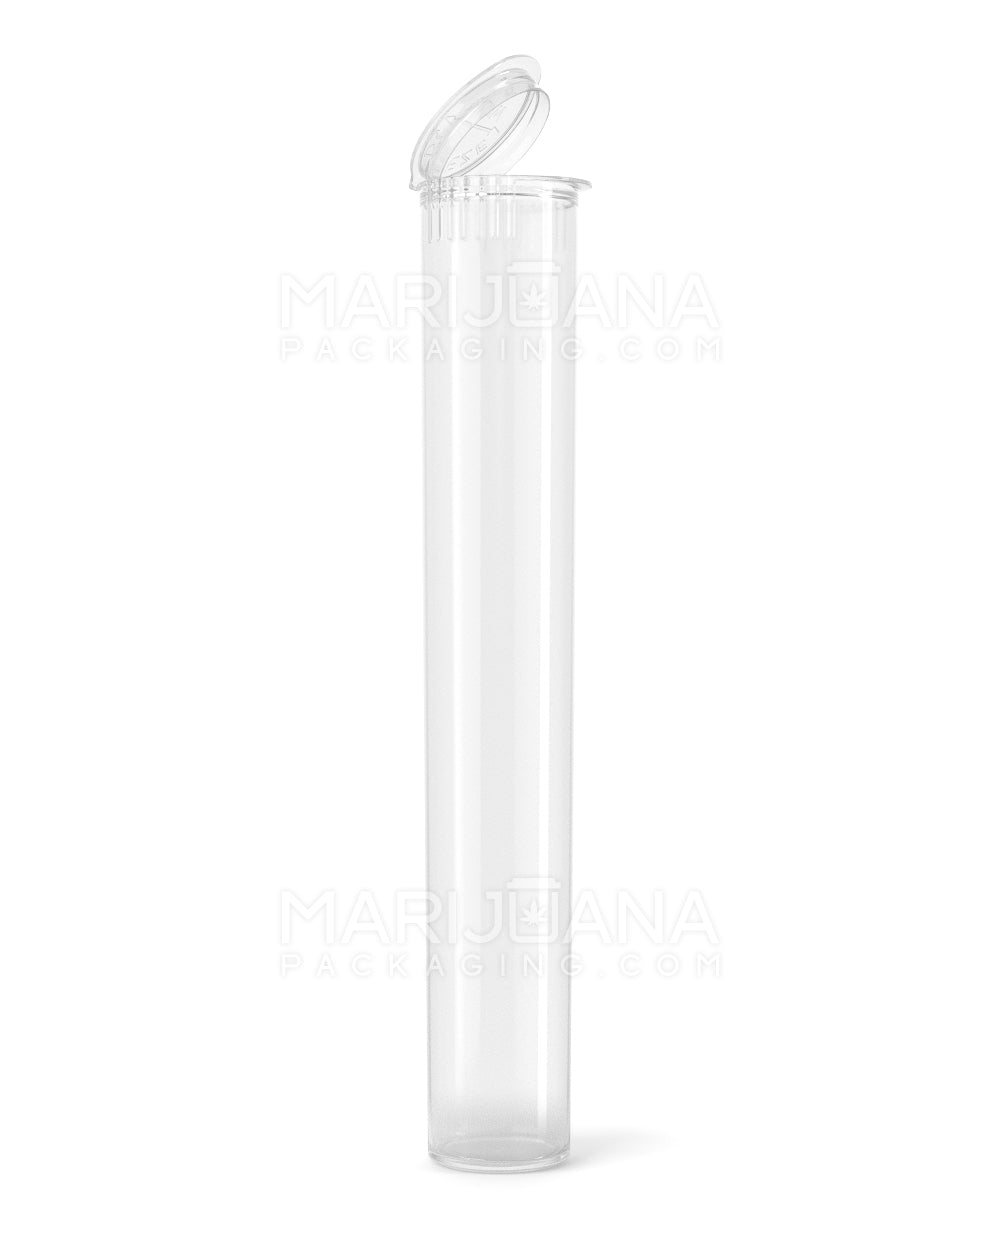 Child Resistant | King Size Pop Top Plastic Pre-Roll Tubes | 116mm - Clear - 1000 Count - 1